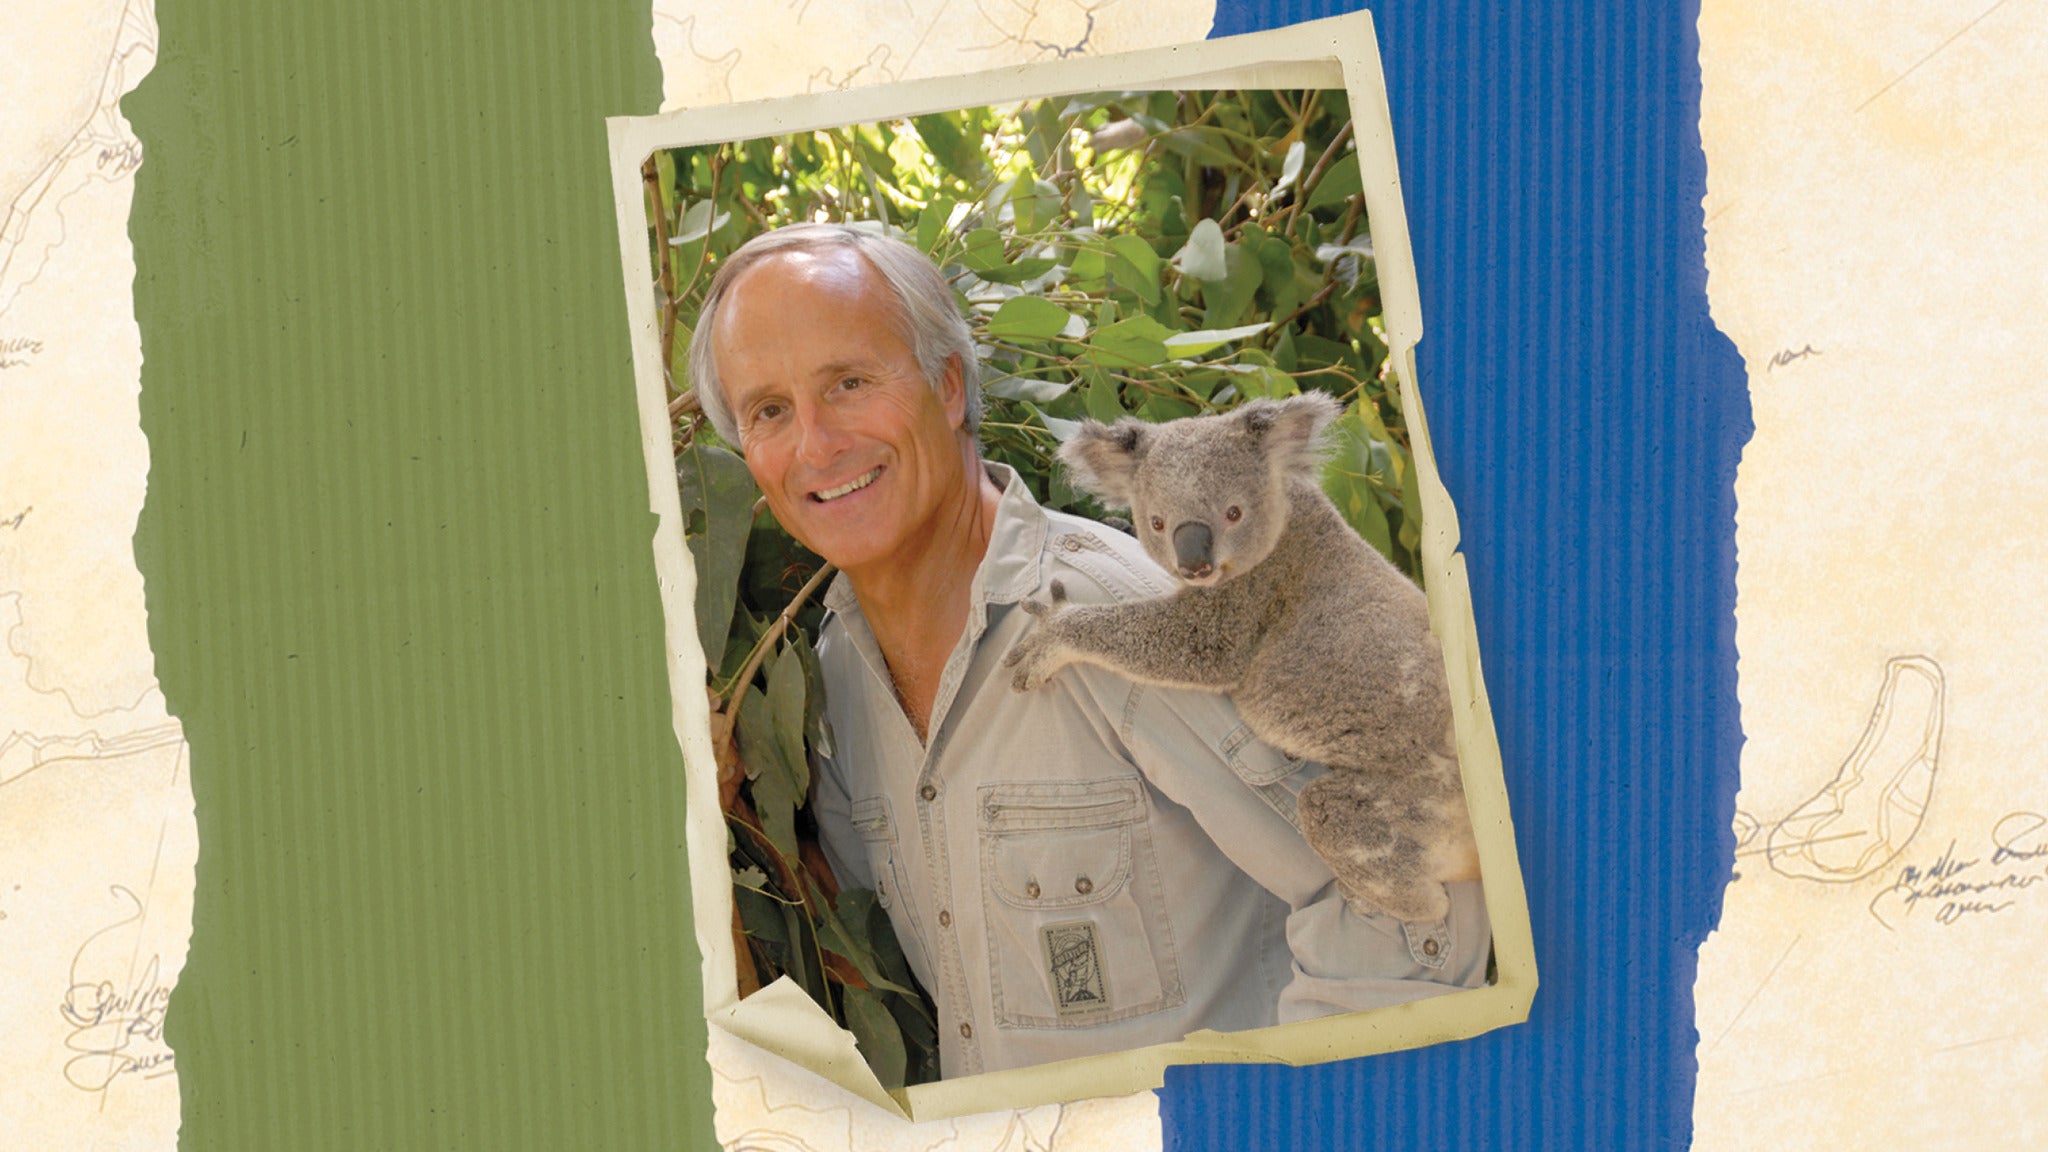 Jack Hanna's Into the Wild Live in Nashville promo photo for Ticketmaster presale offer code